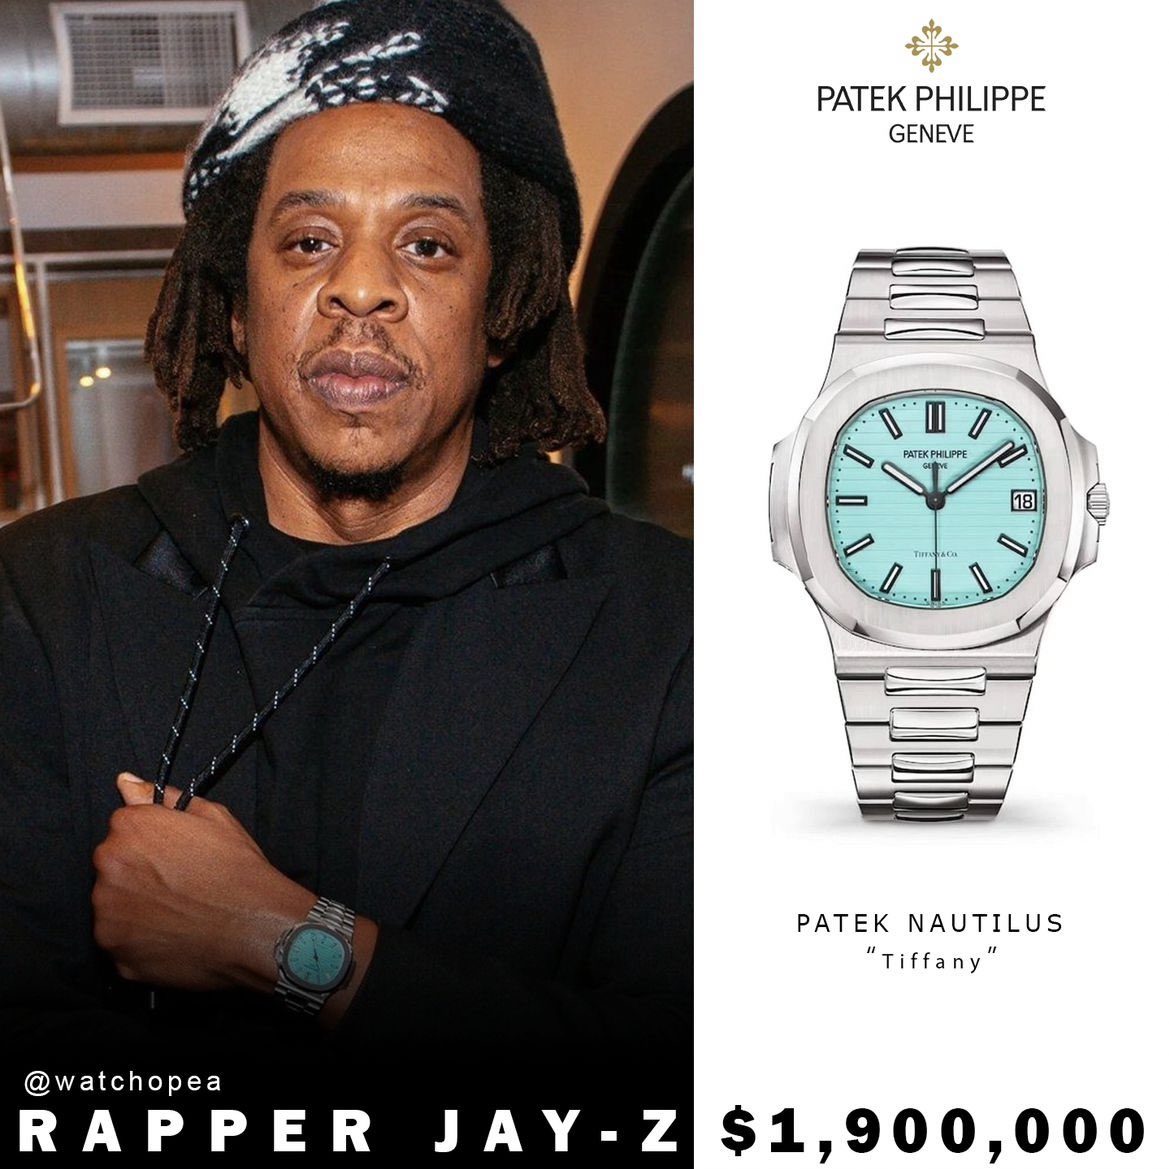 5 celebrities seen rocking the coveted $1,900,000 Patek Philippe Nautilus 'Tiffany'

1. Lionel Messi             2. Jay-Z